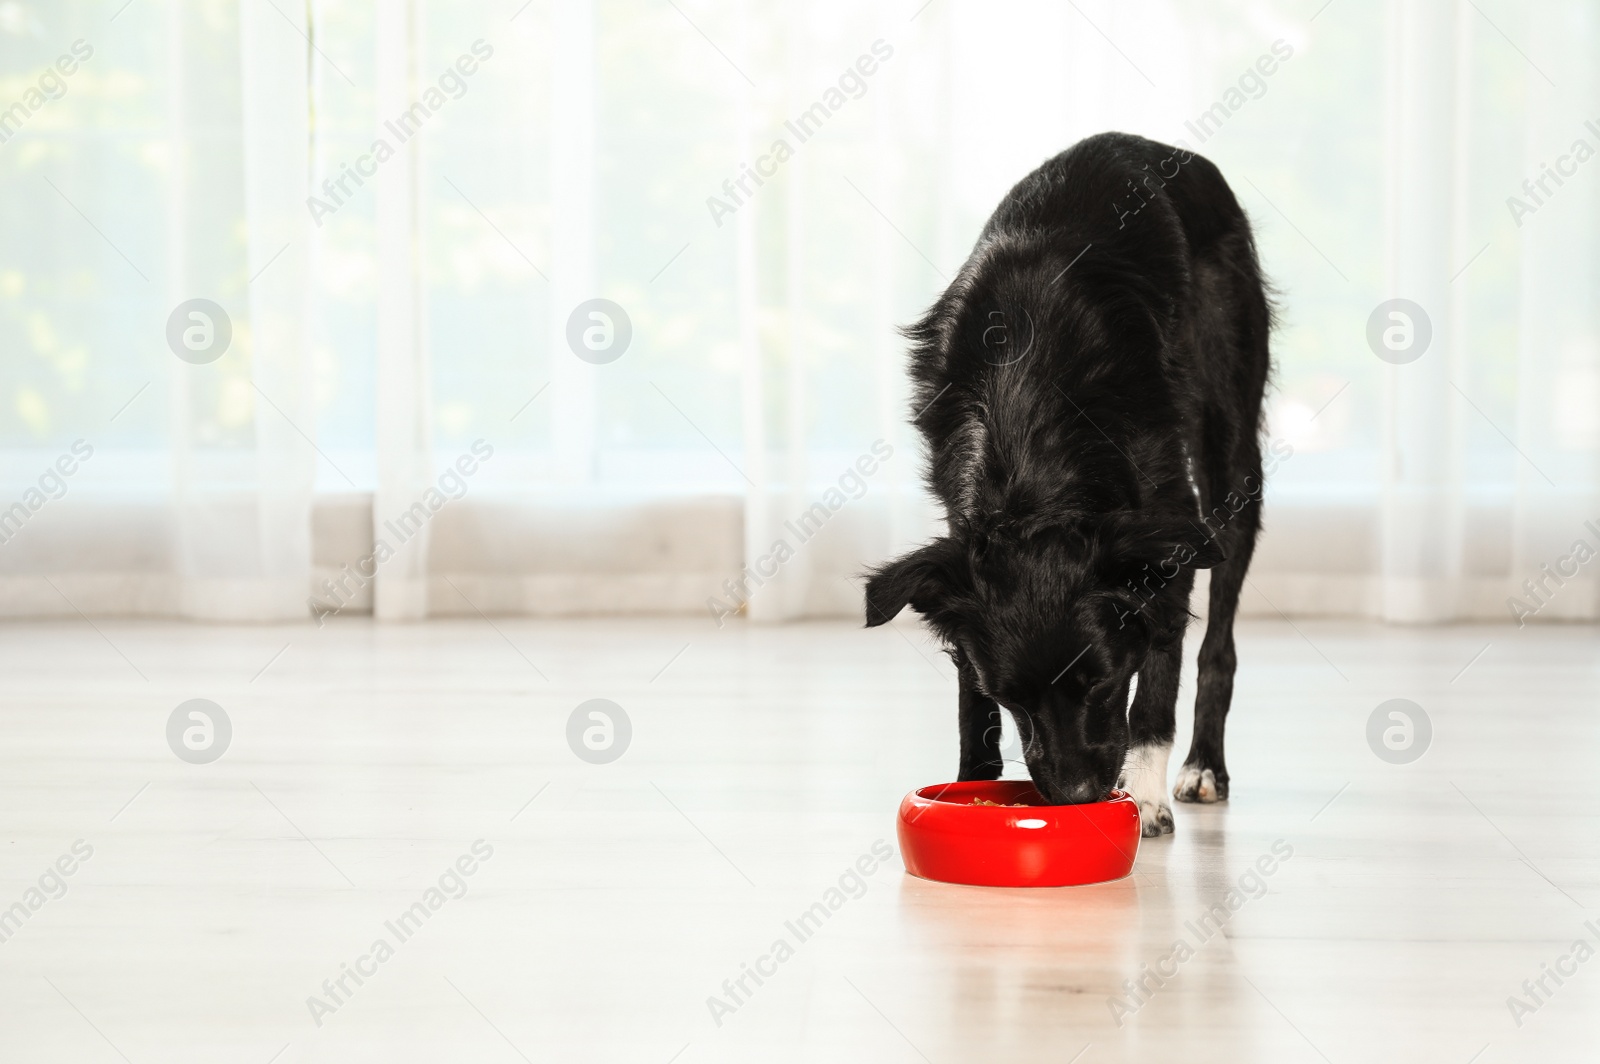 Photo of Cute dog eating from bowl on floor in room. Space for text